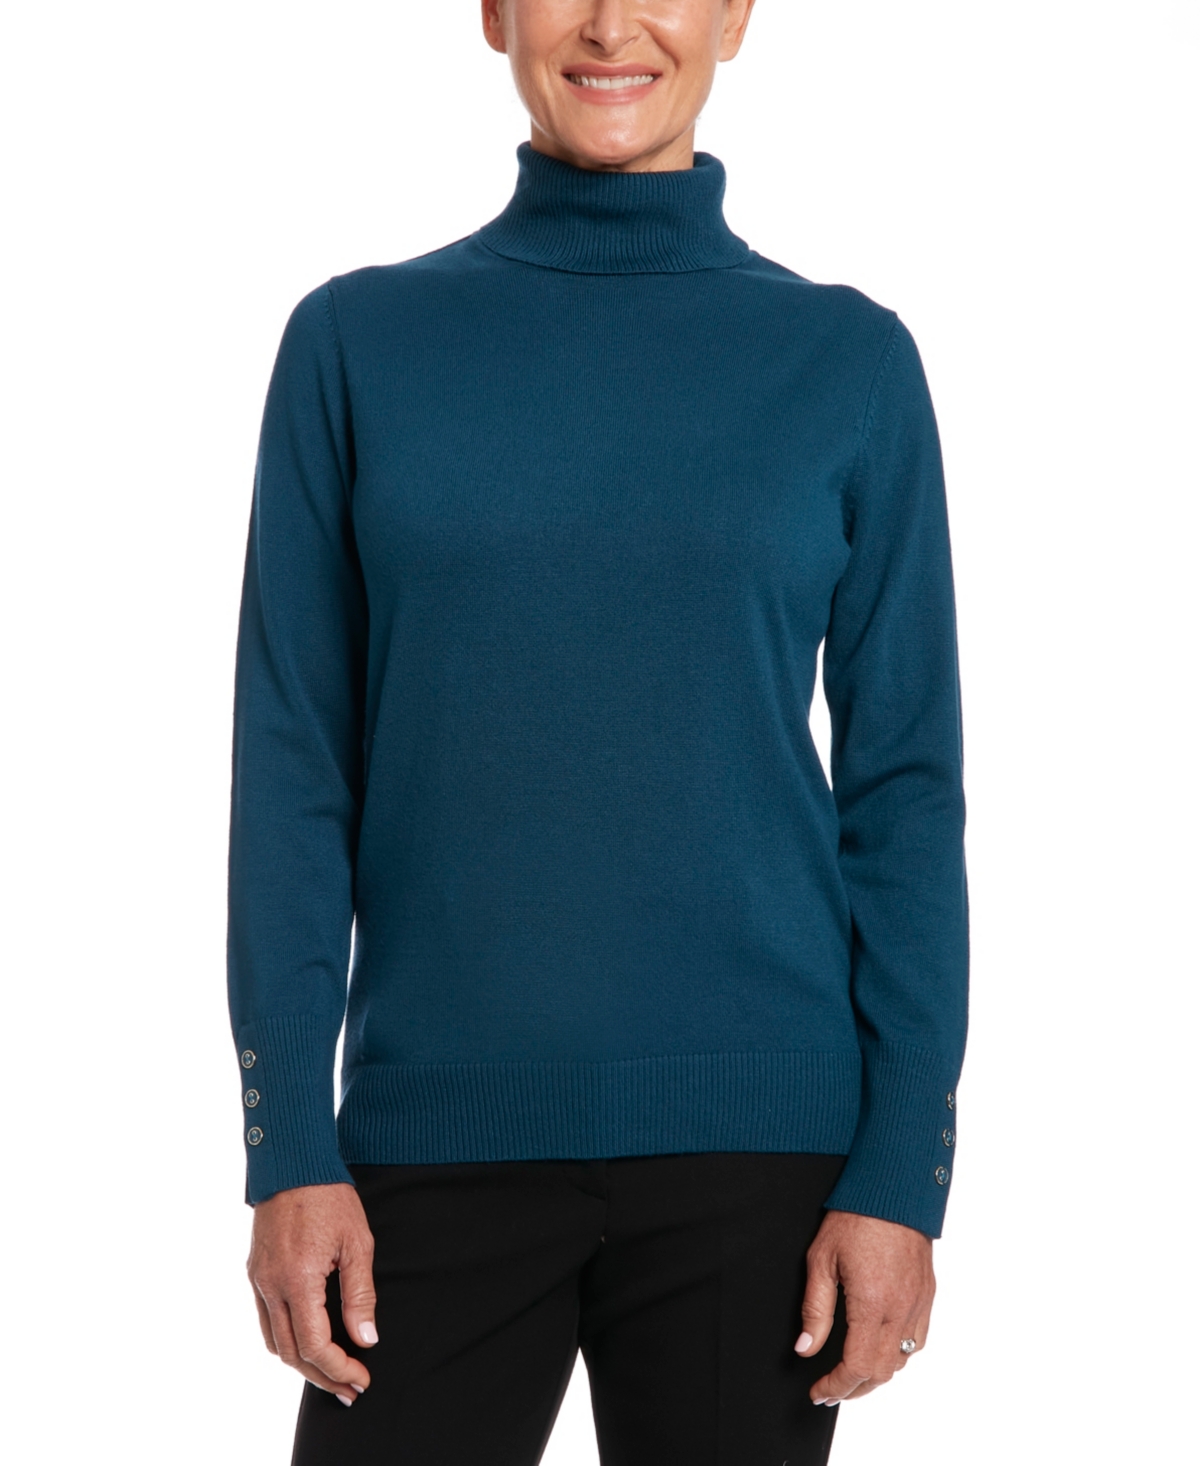 Solid Turtleneck with Button Cuff - Teal